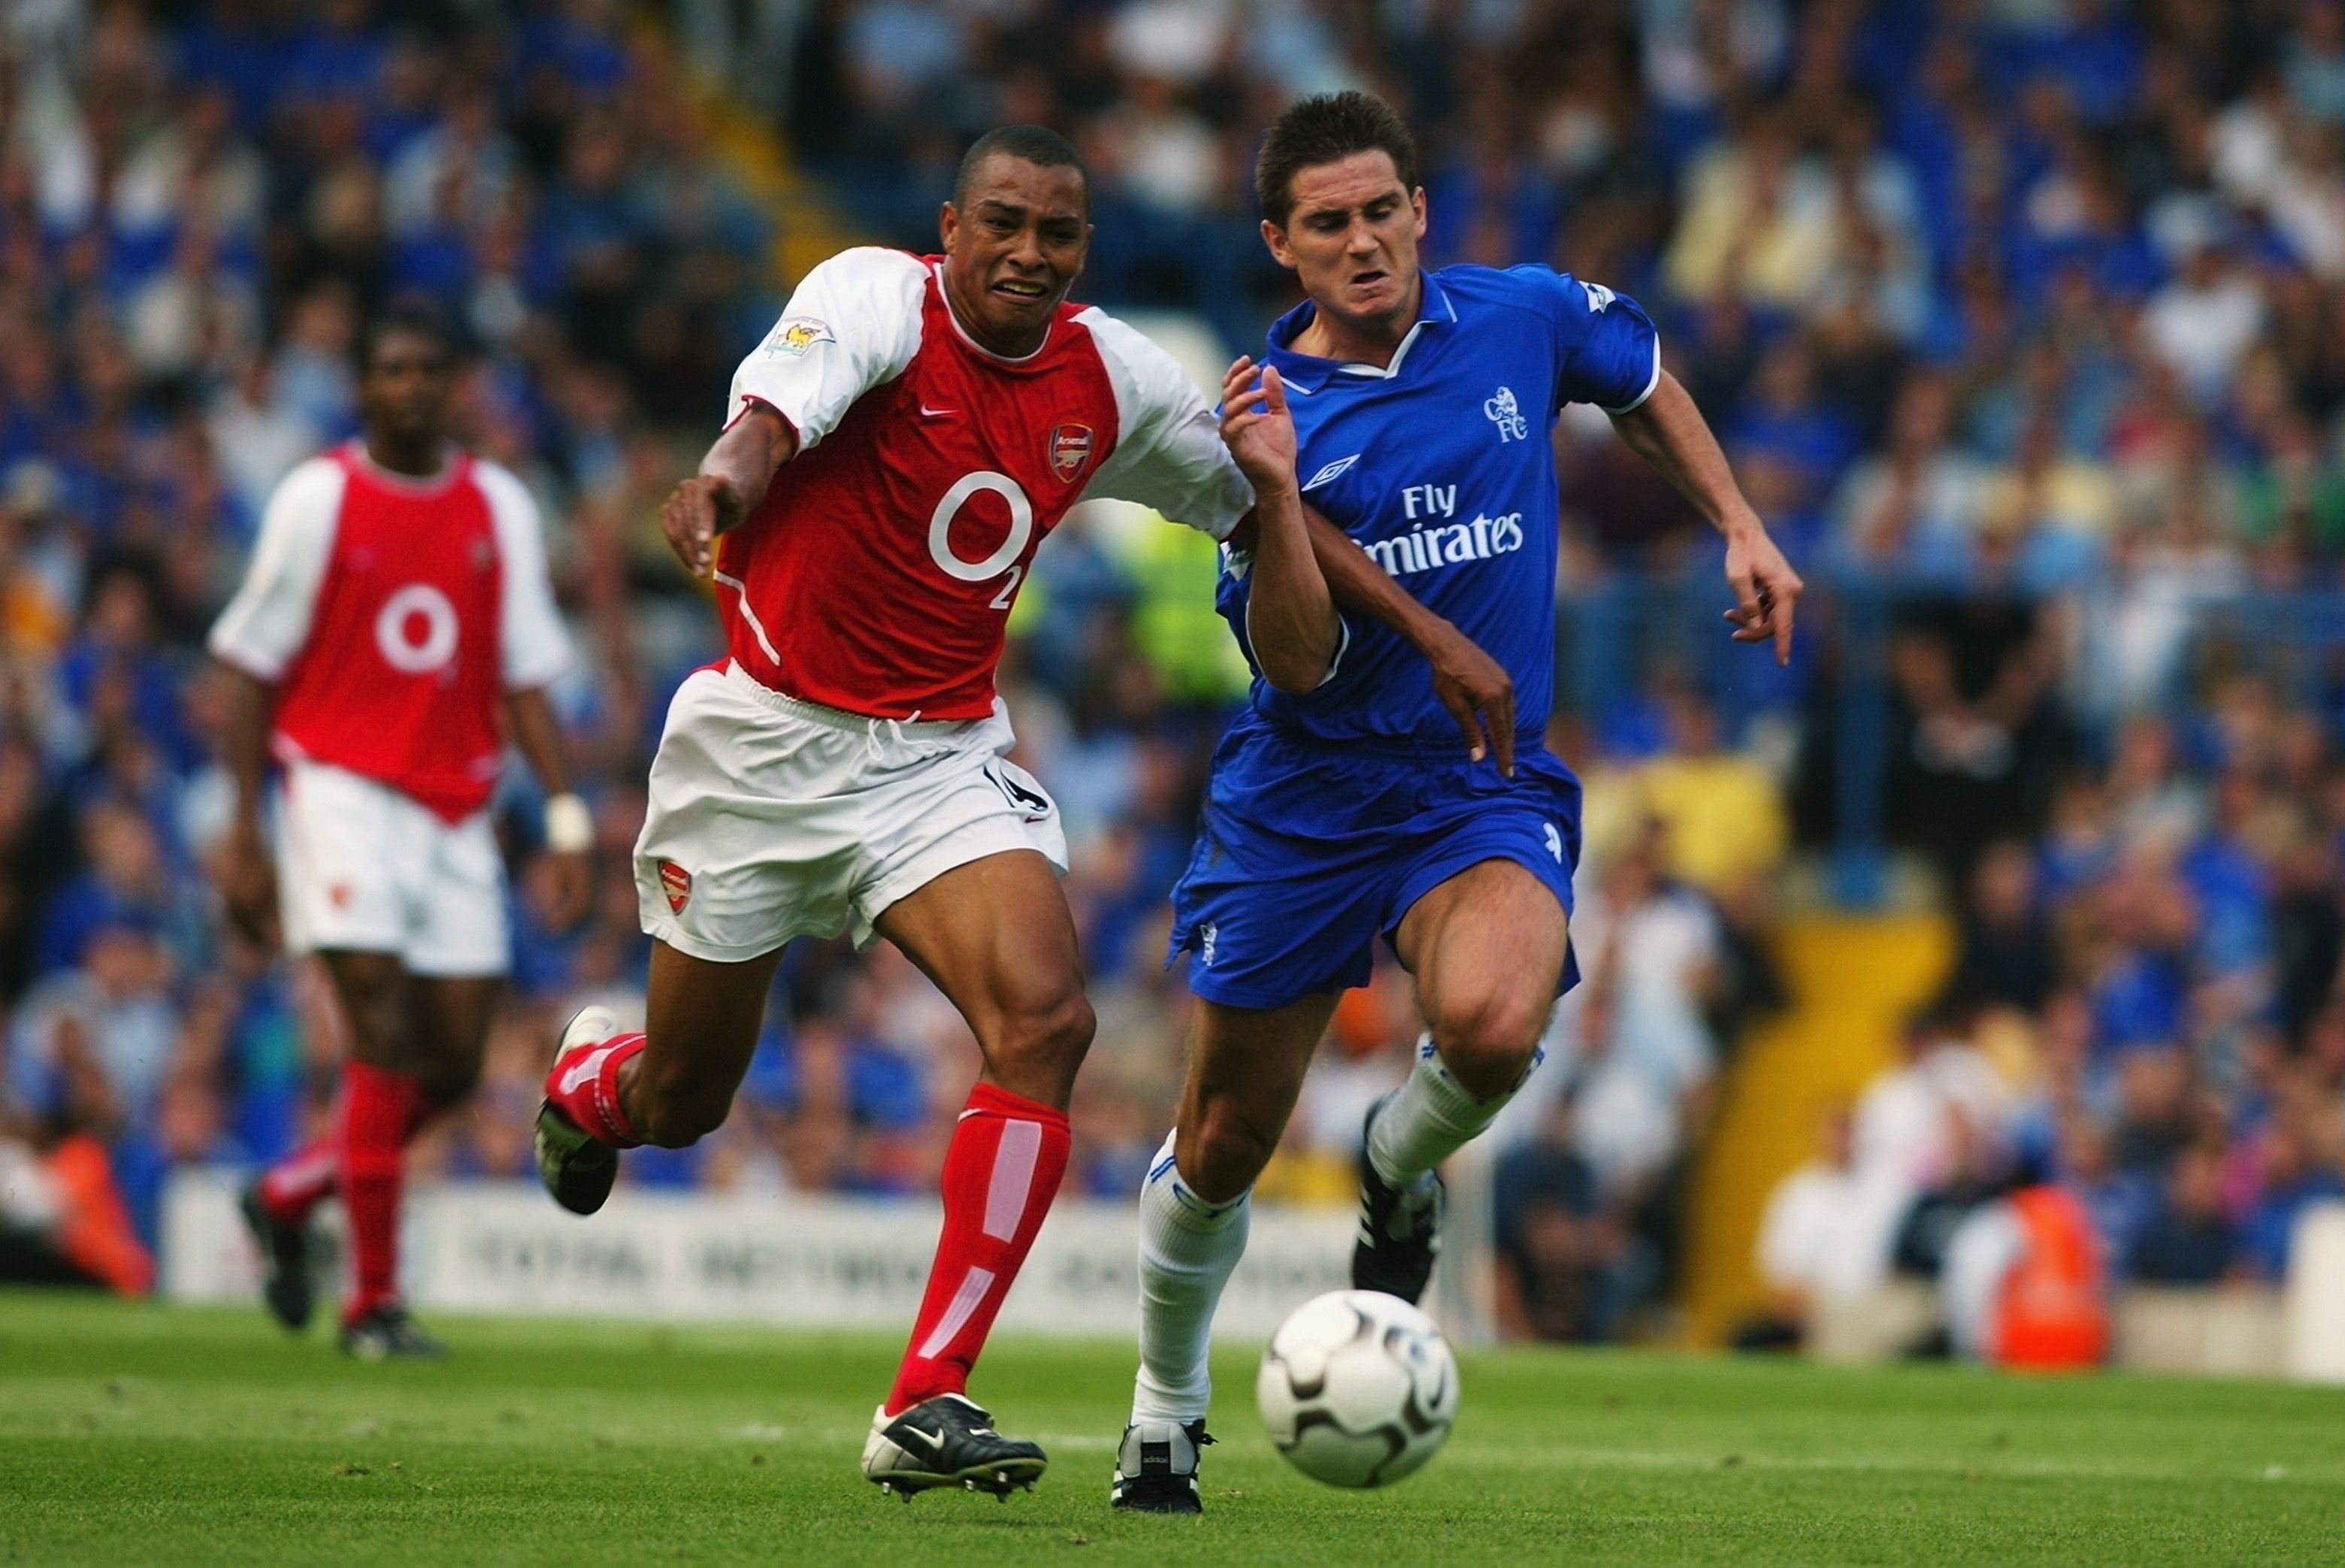 LONDON - SEPTEMBER 1: Frank Lampard of Chelsea tackles Gilberto of Arsenal during the FA Barclaycard Premiership match between Chelsea and Arsenal at Stamford Bridge, London, England on September 1, 2002. (Photo by Ben Radford/Getty Images) The match ended in a 1-1 draw.